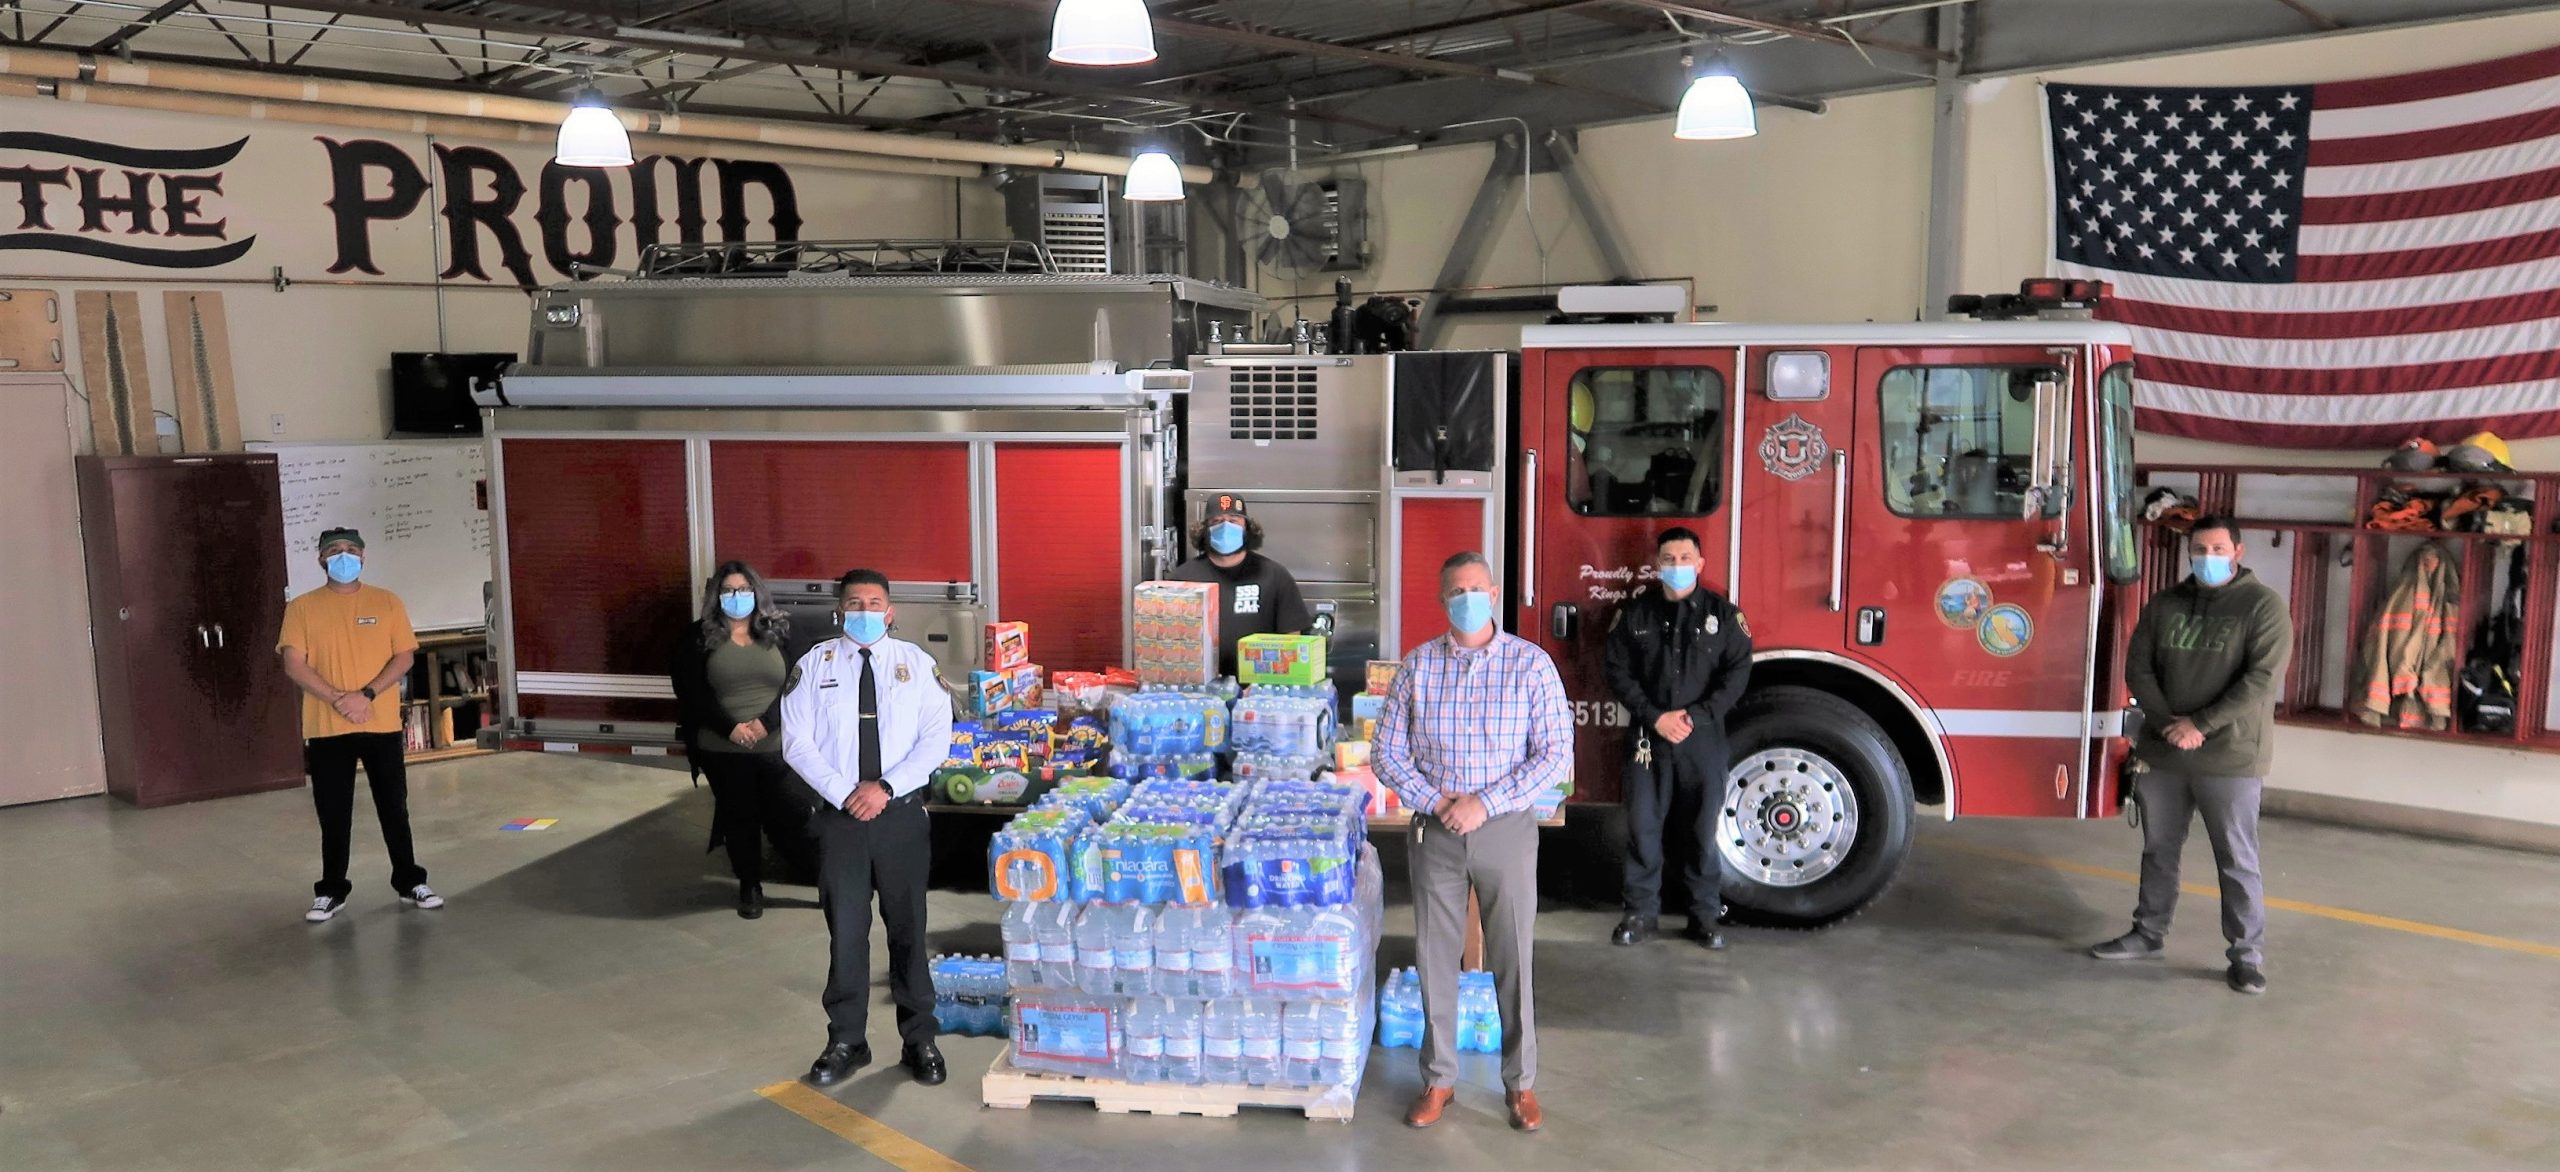 Prison fire engine and donated supplies.